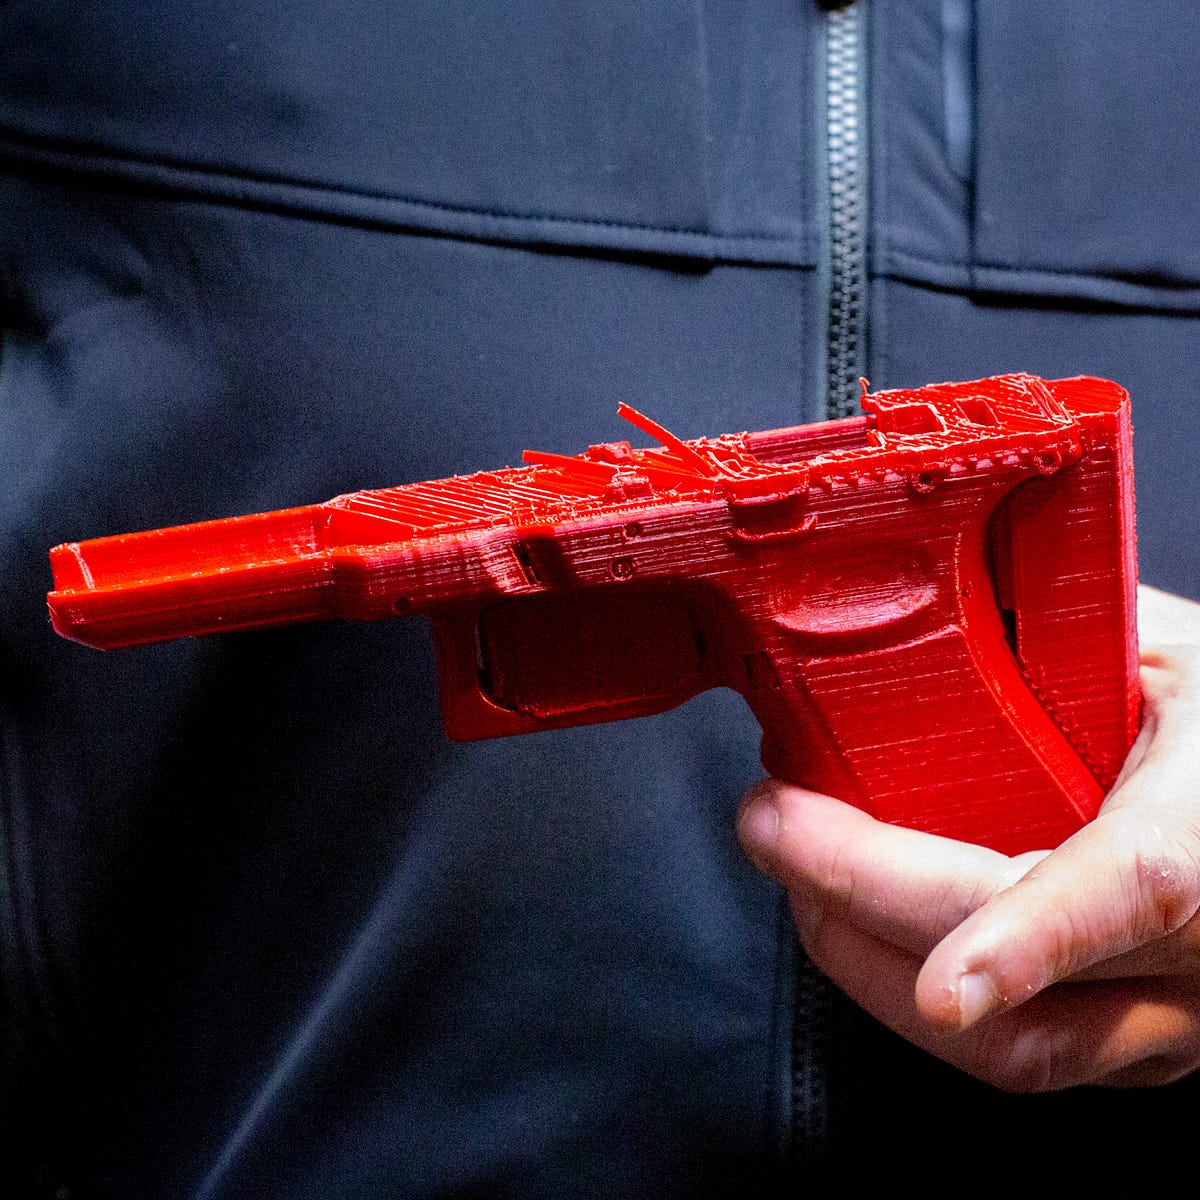 The 3D-Printed Gun Isn't Coming. It's Already Here. | by Kim Kelly | GEN